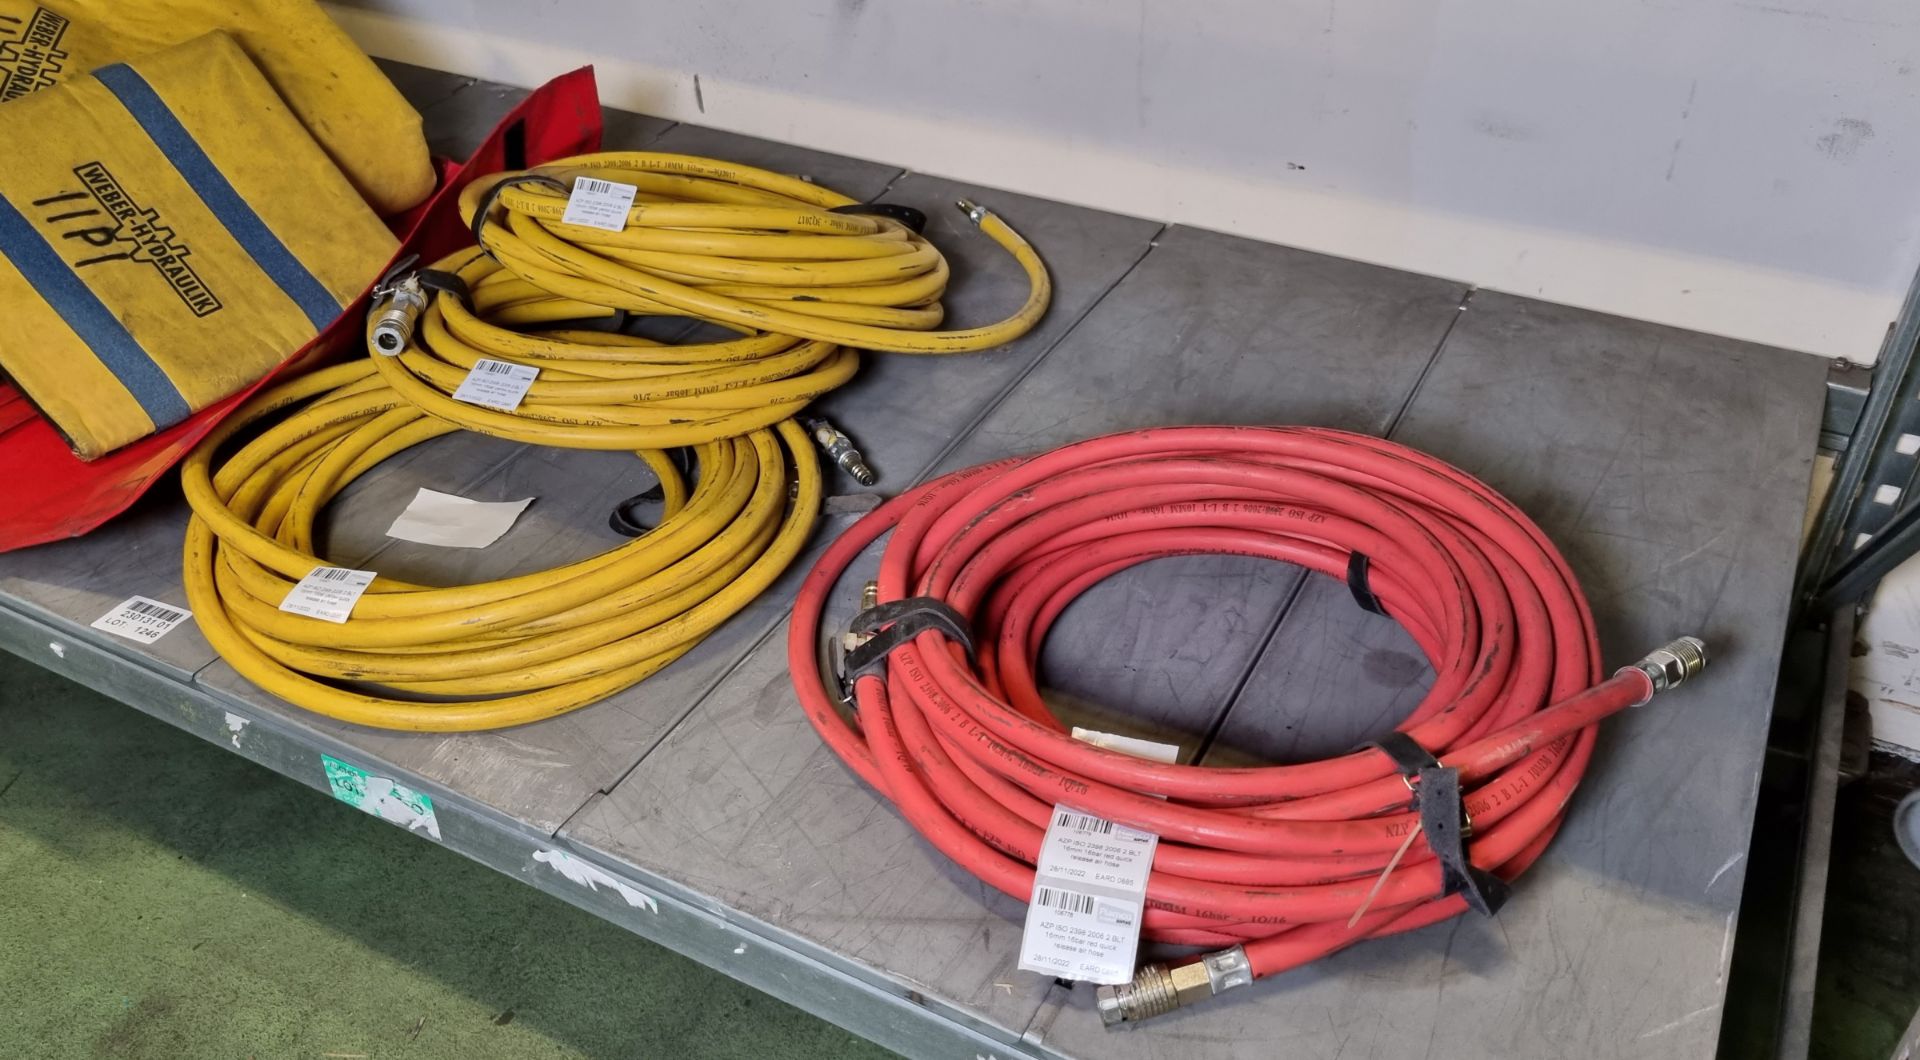 2x AZP ISO 2398 2006 2 BLT 16mm 16bar red quick release air hoses, 3x AZP ISO 2398 2006 2 BLT 16mm - Image 2 of 6